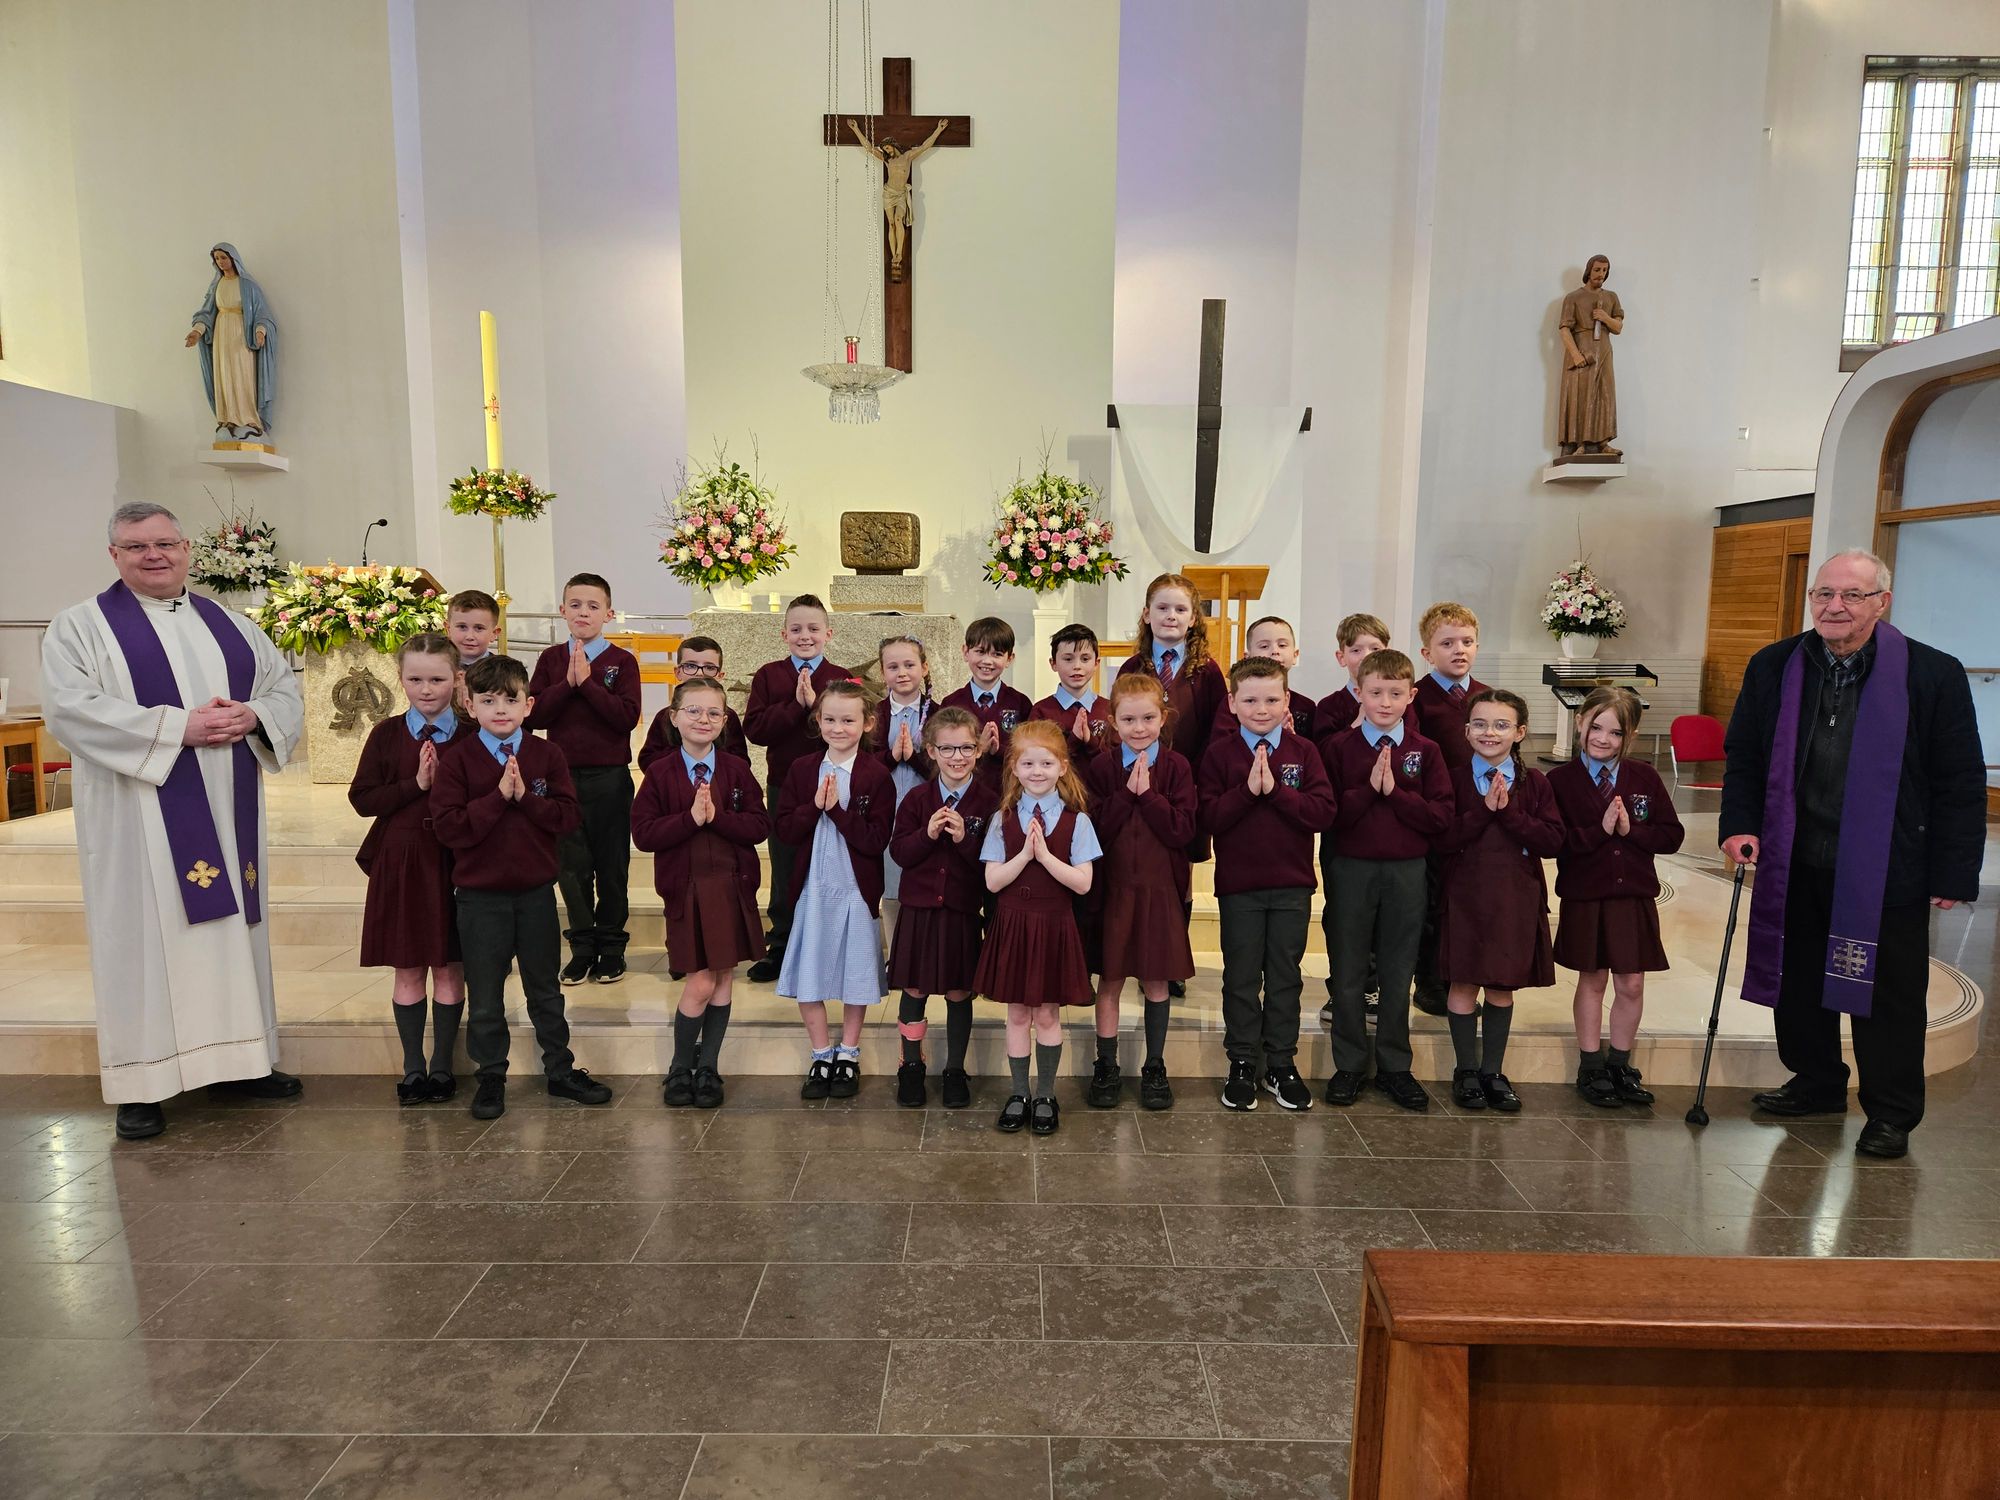 Congratulations to Mrs Bradley’s Year 4A who received the sacrament of Penance